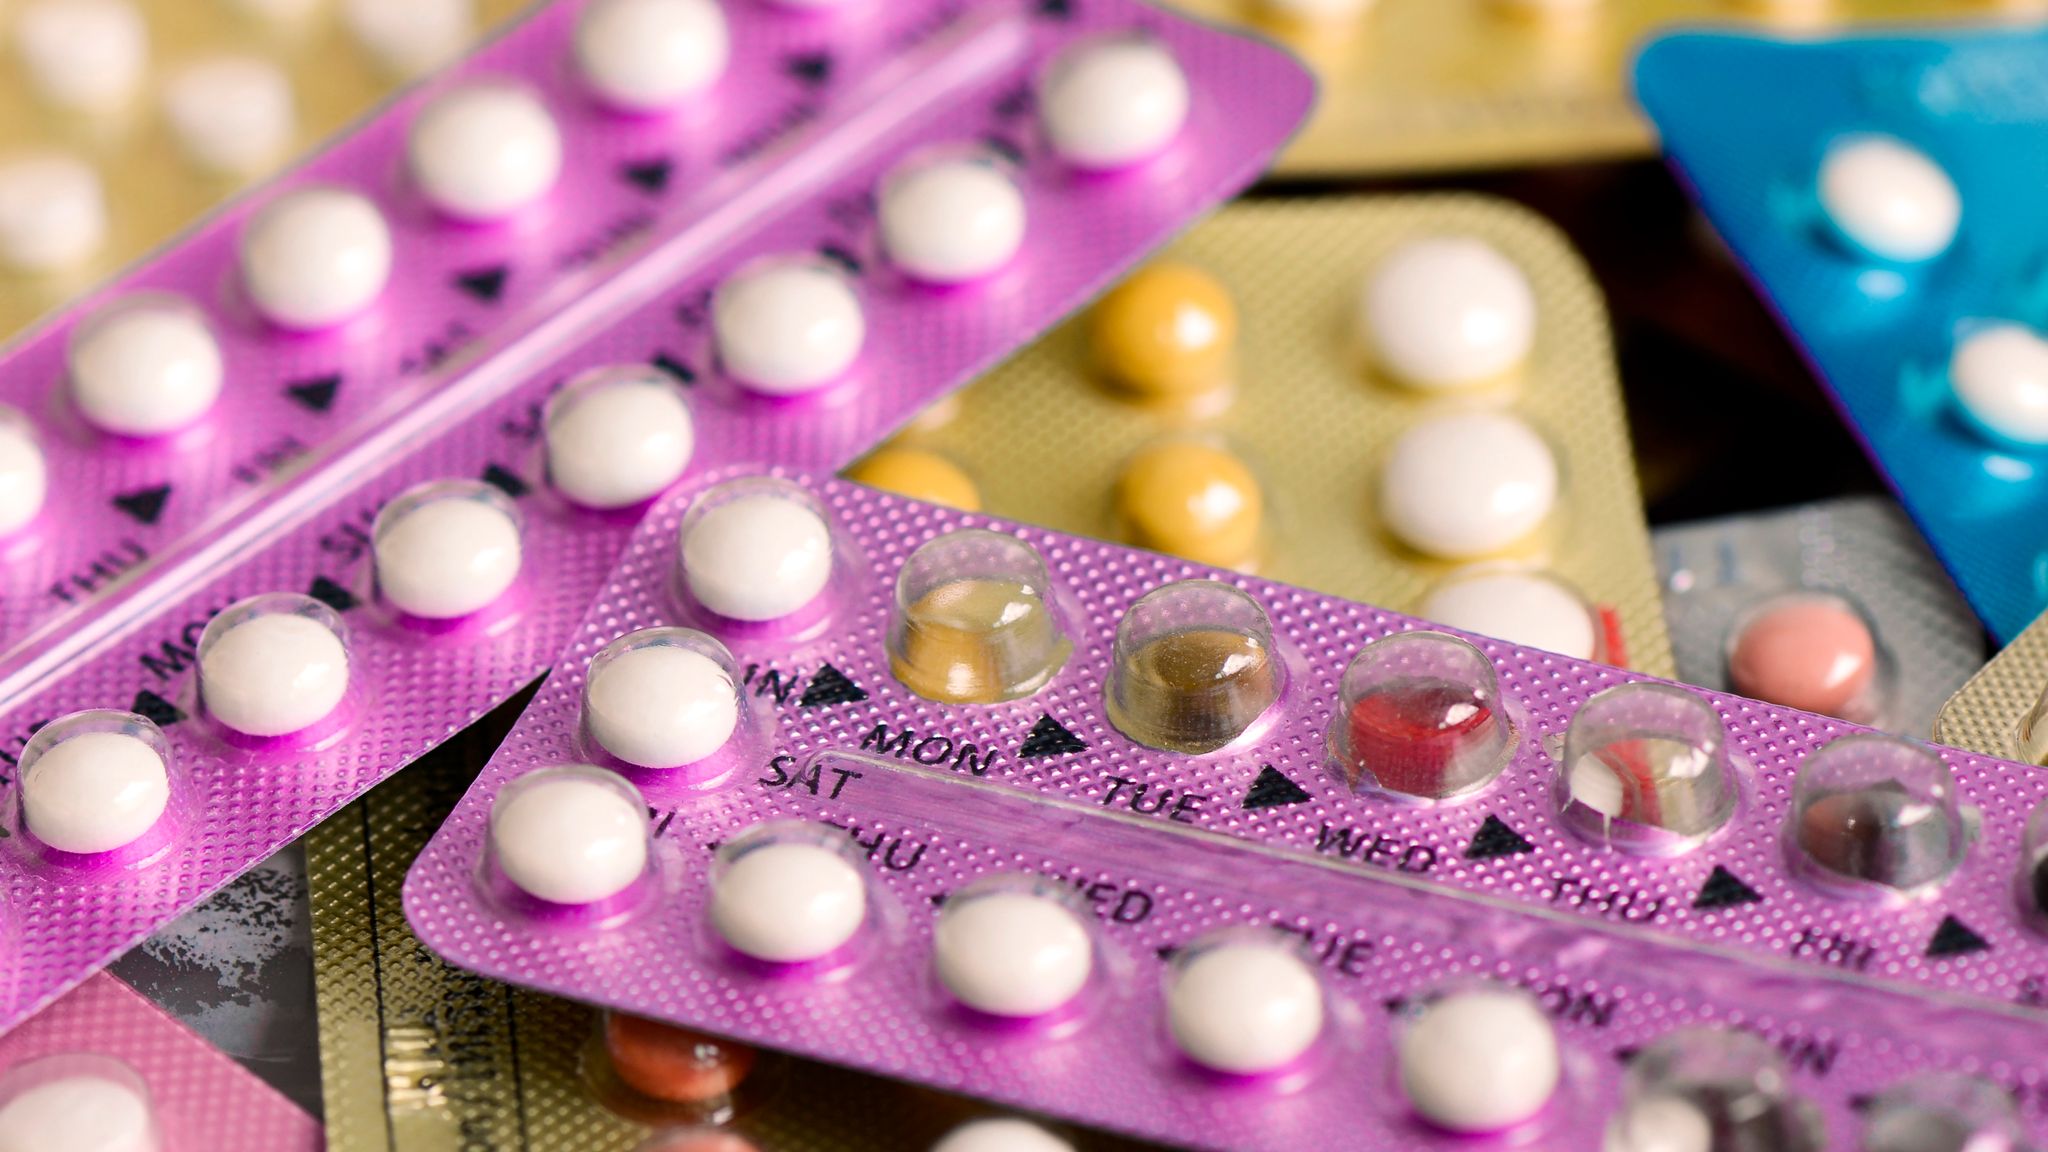 All hormonal contraceptives increase breast cancer risk – study